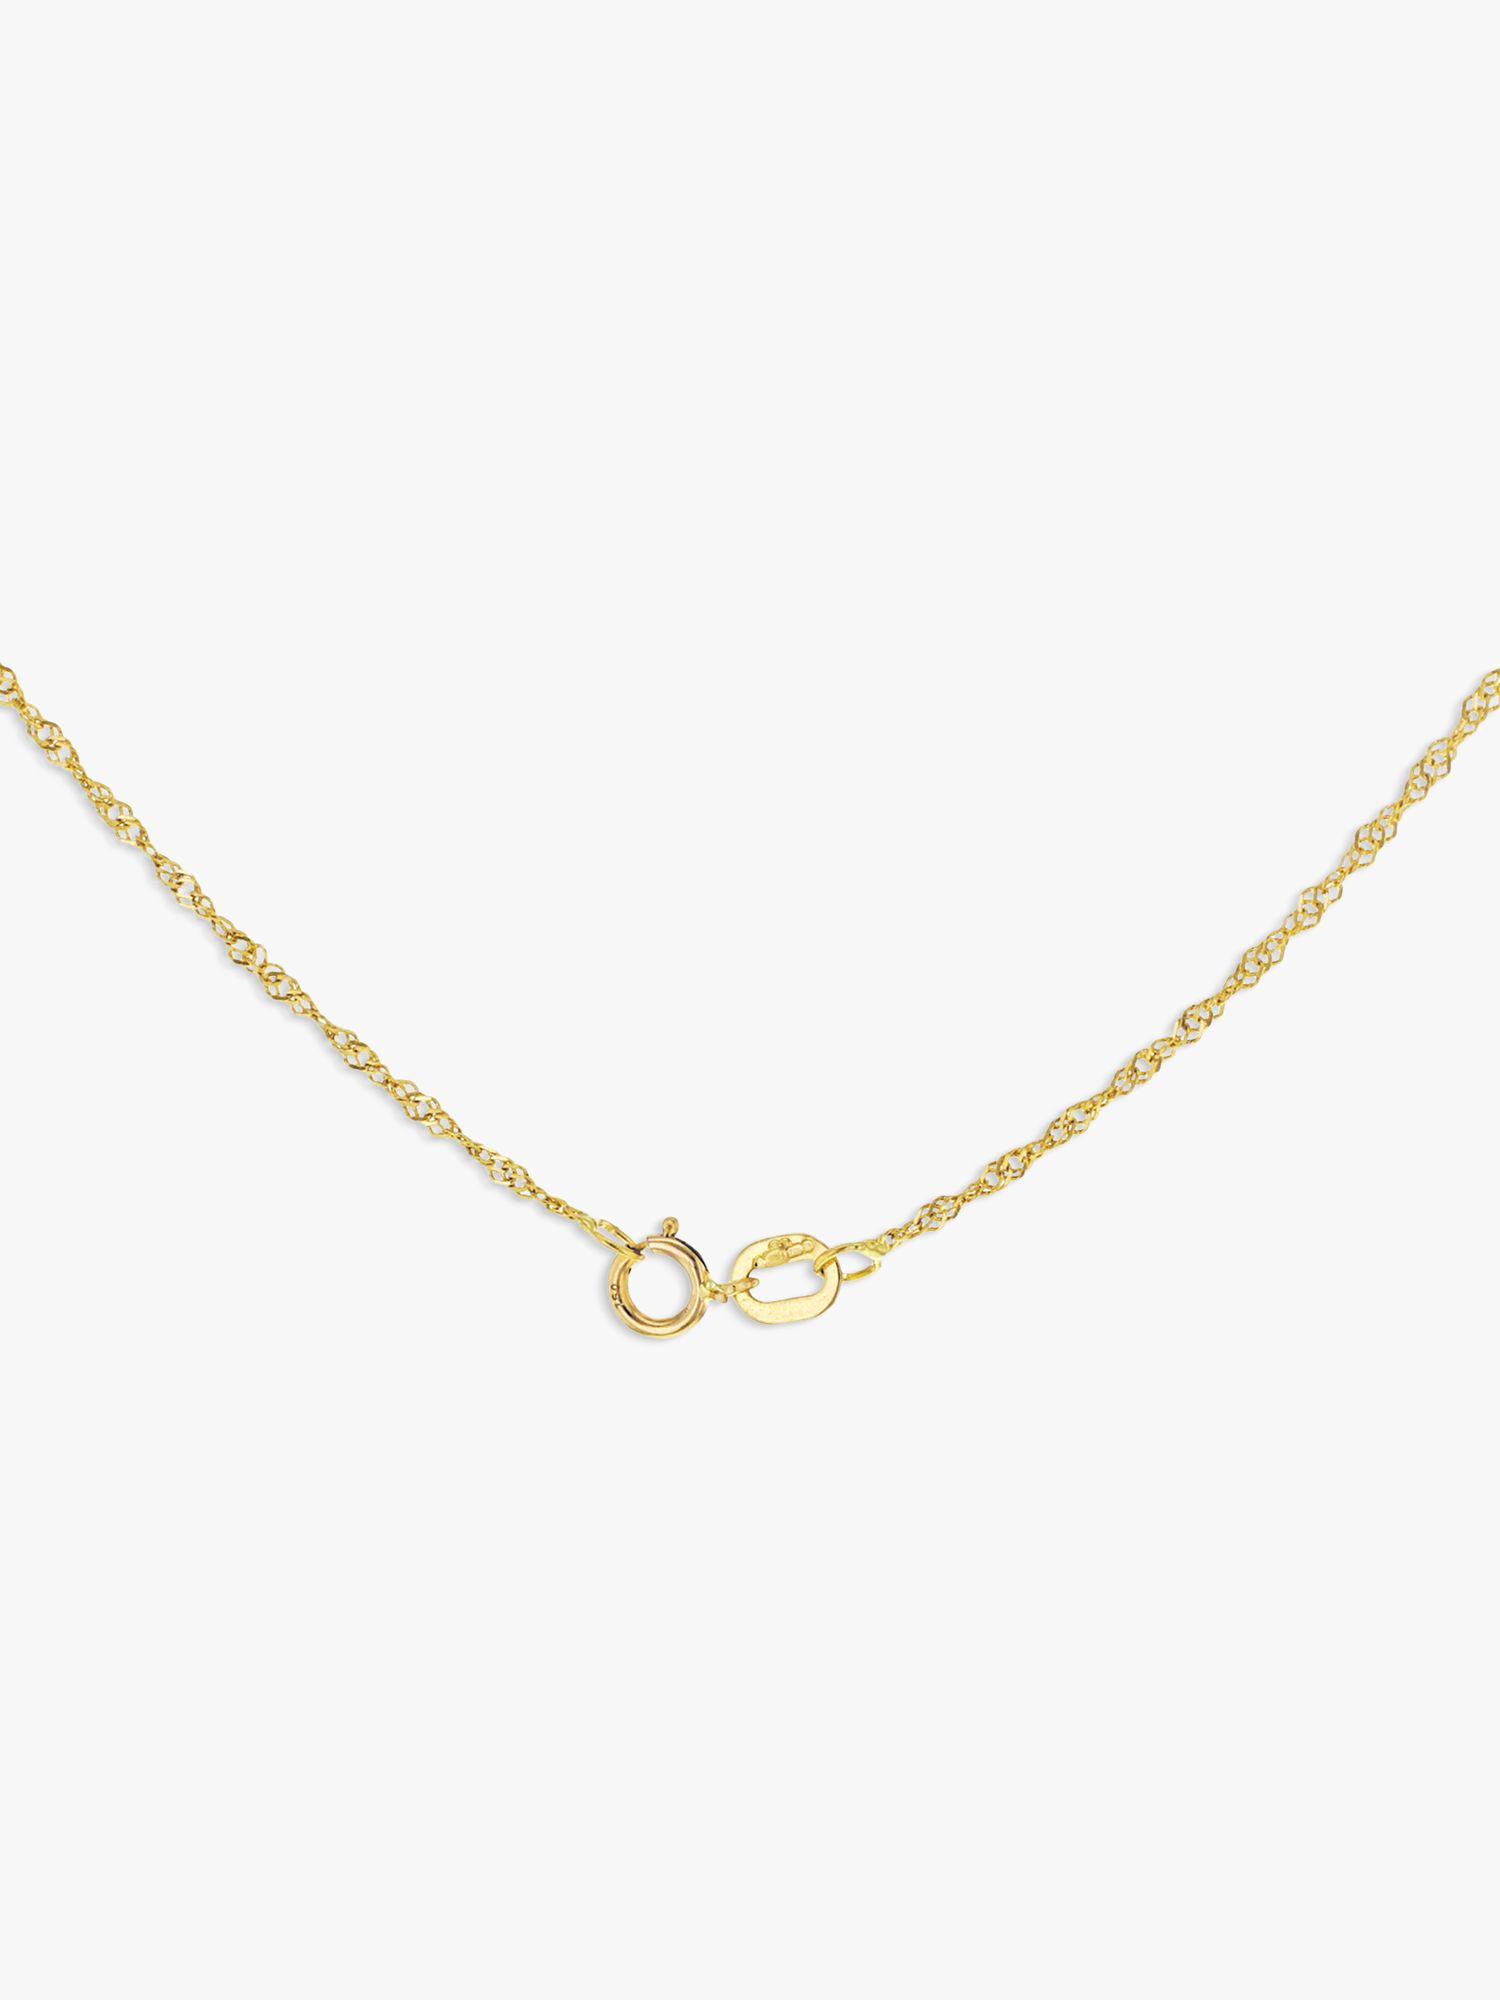 IBB 18ct Yellow Gold Twist Curb Chain Necklace, Yellow Gold